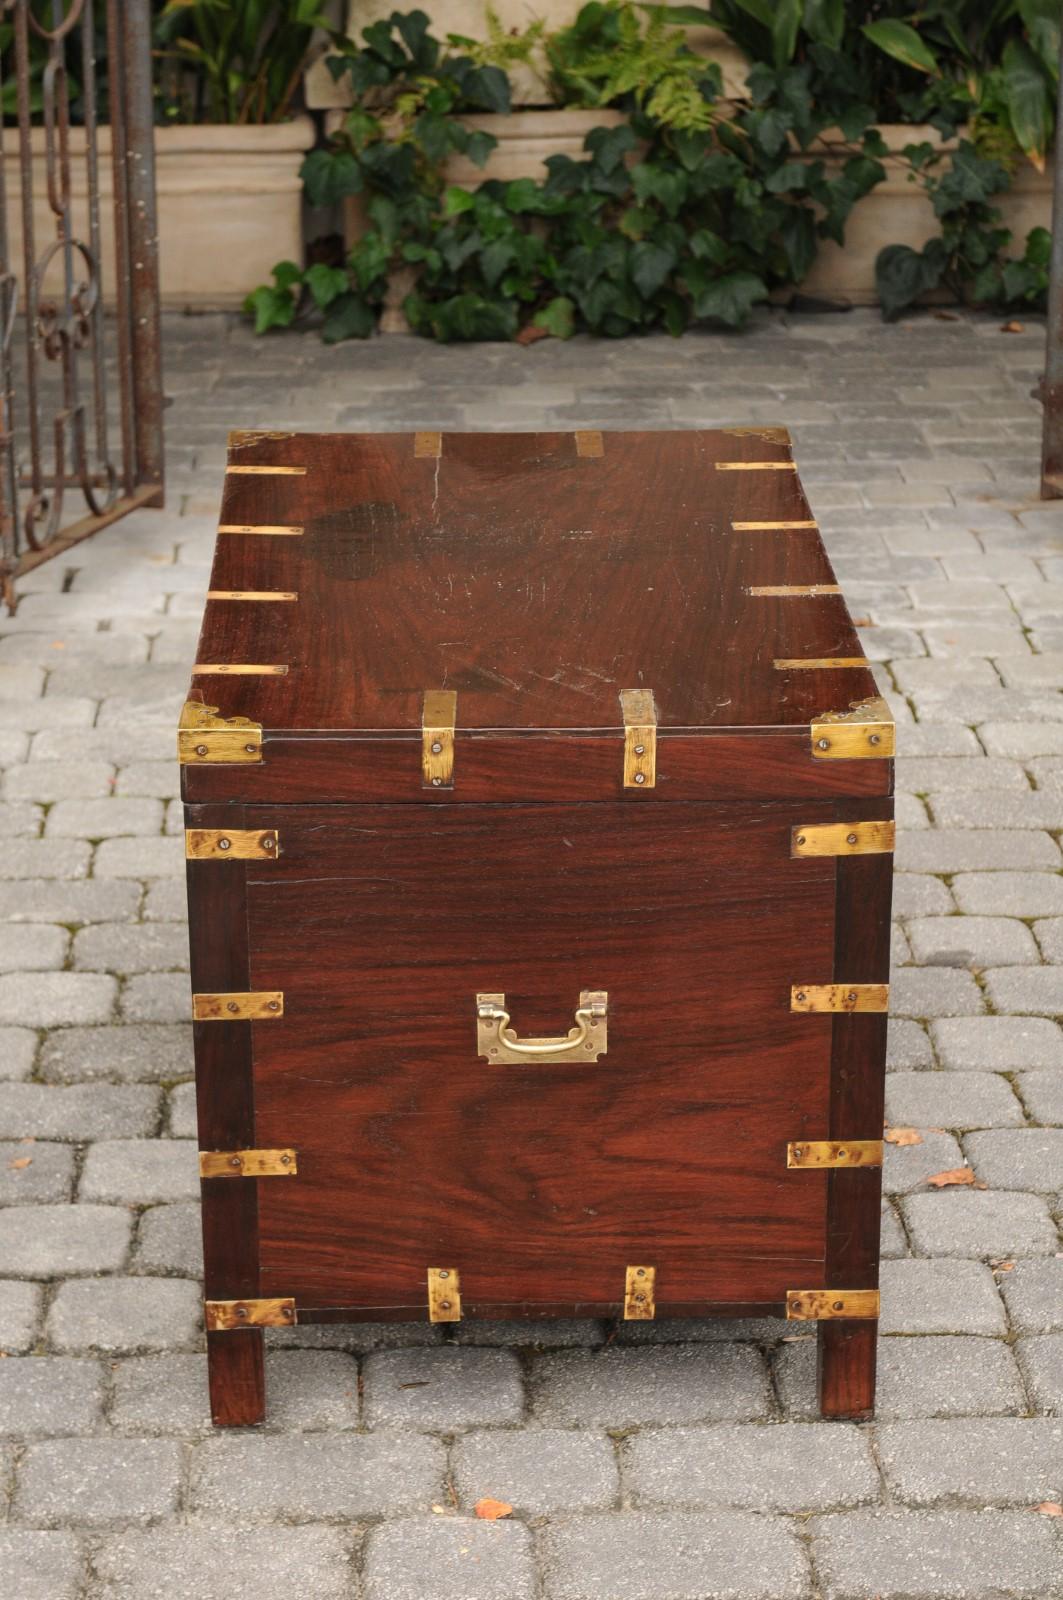 19th Century English Mahogany Brass-Bound Campaign Trunk with Lateral Handles, circa 1870